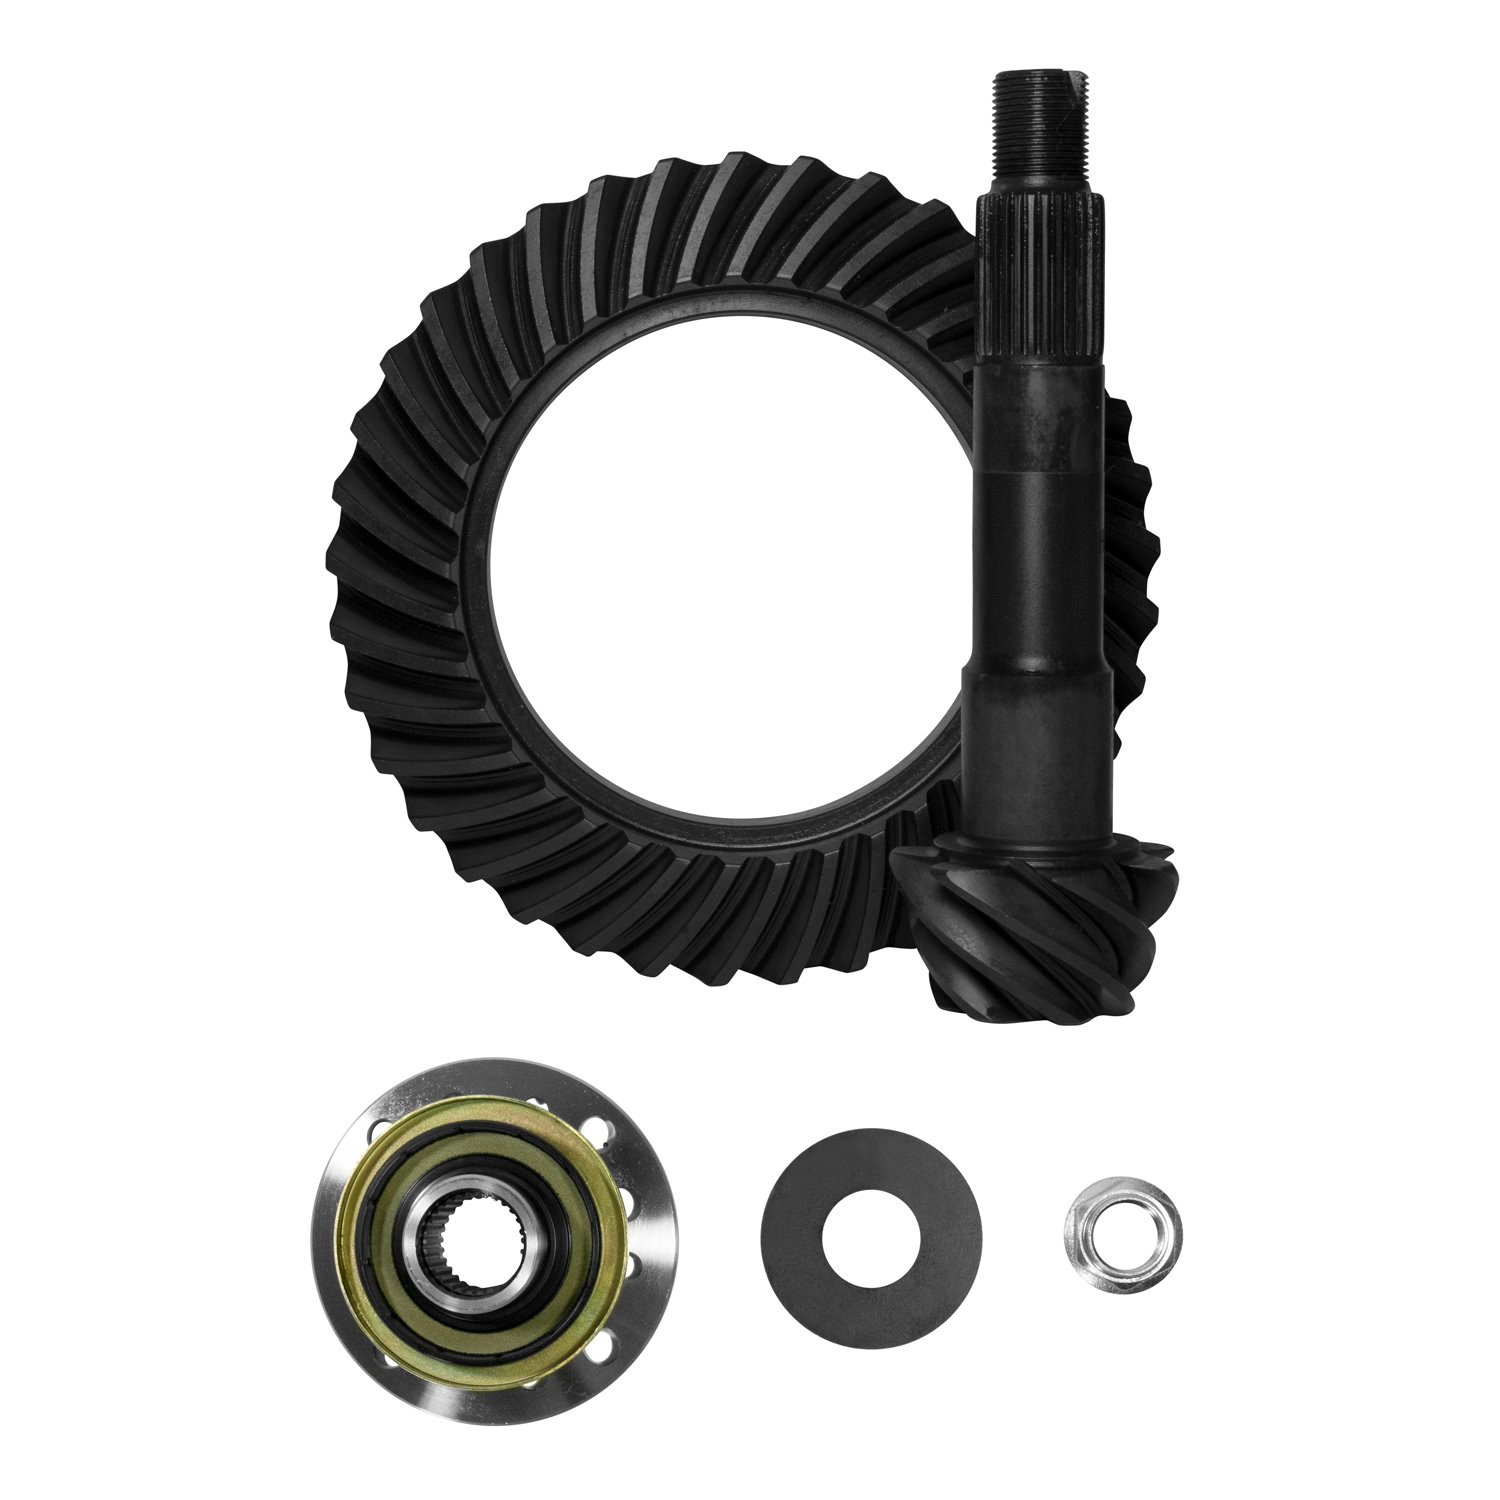 High Performance Ring & Pinion Gear Set For Toyota V6 In A 4.30 Ratio